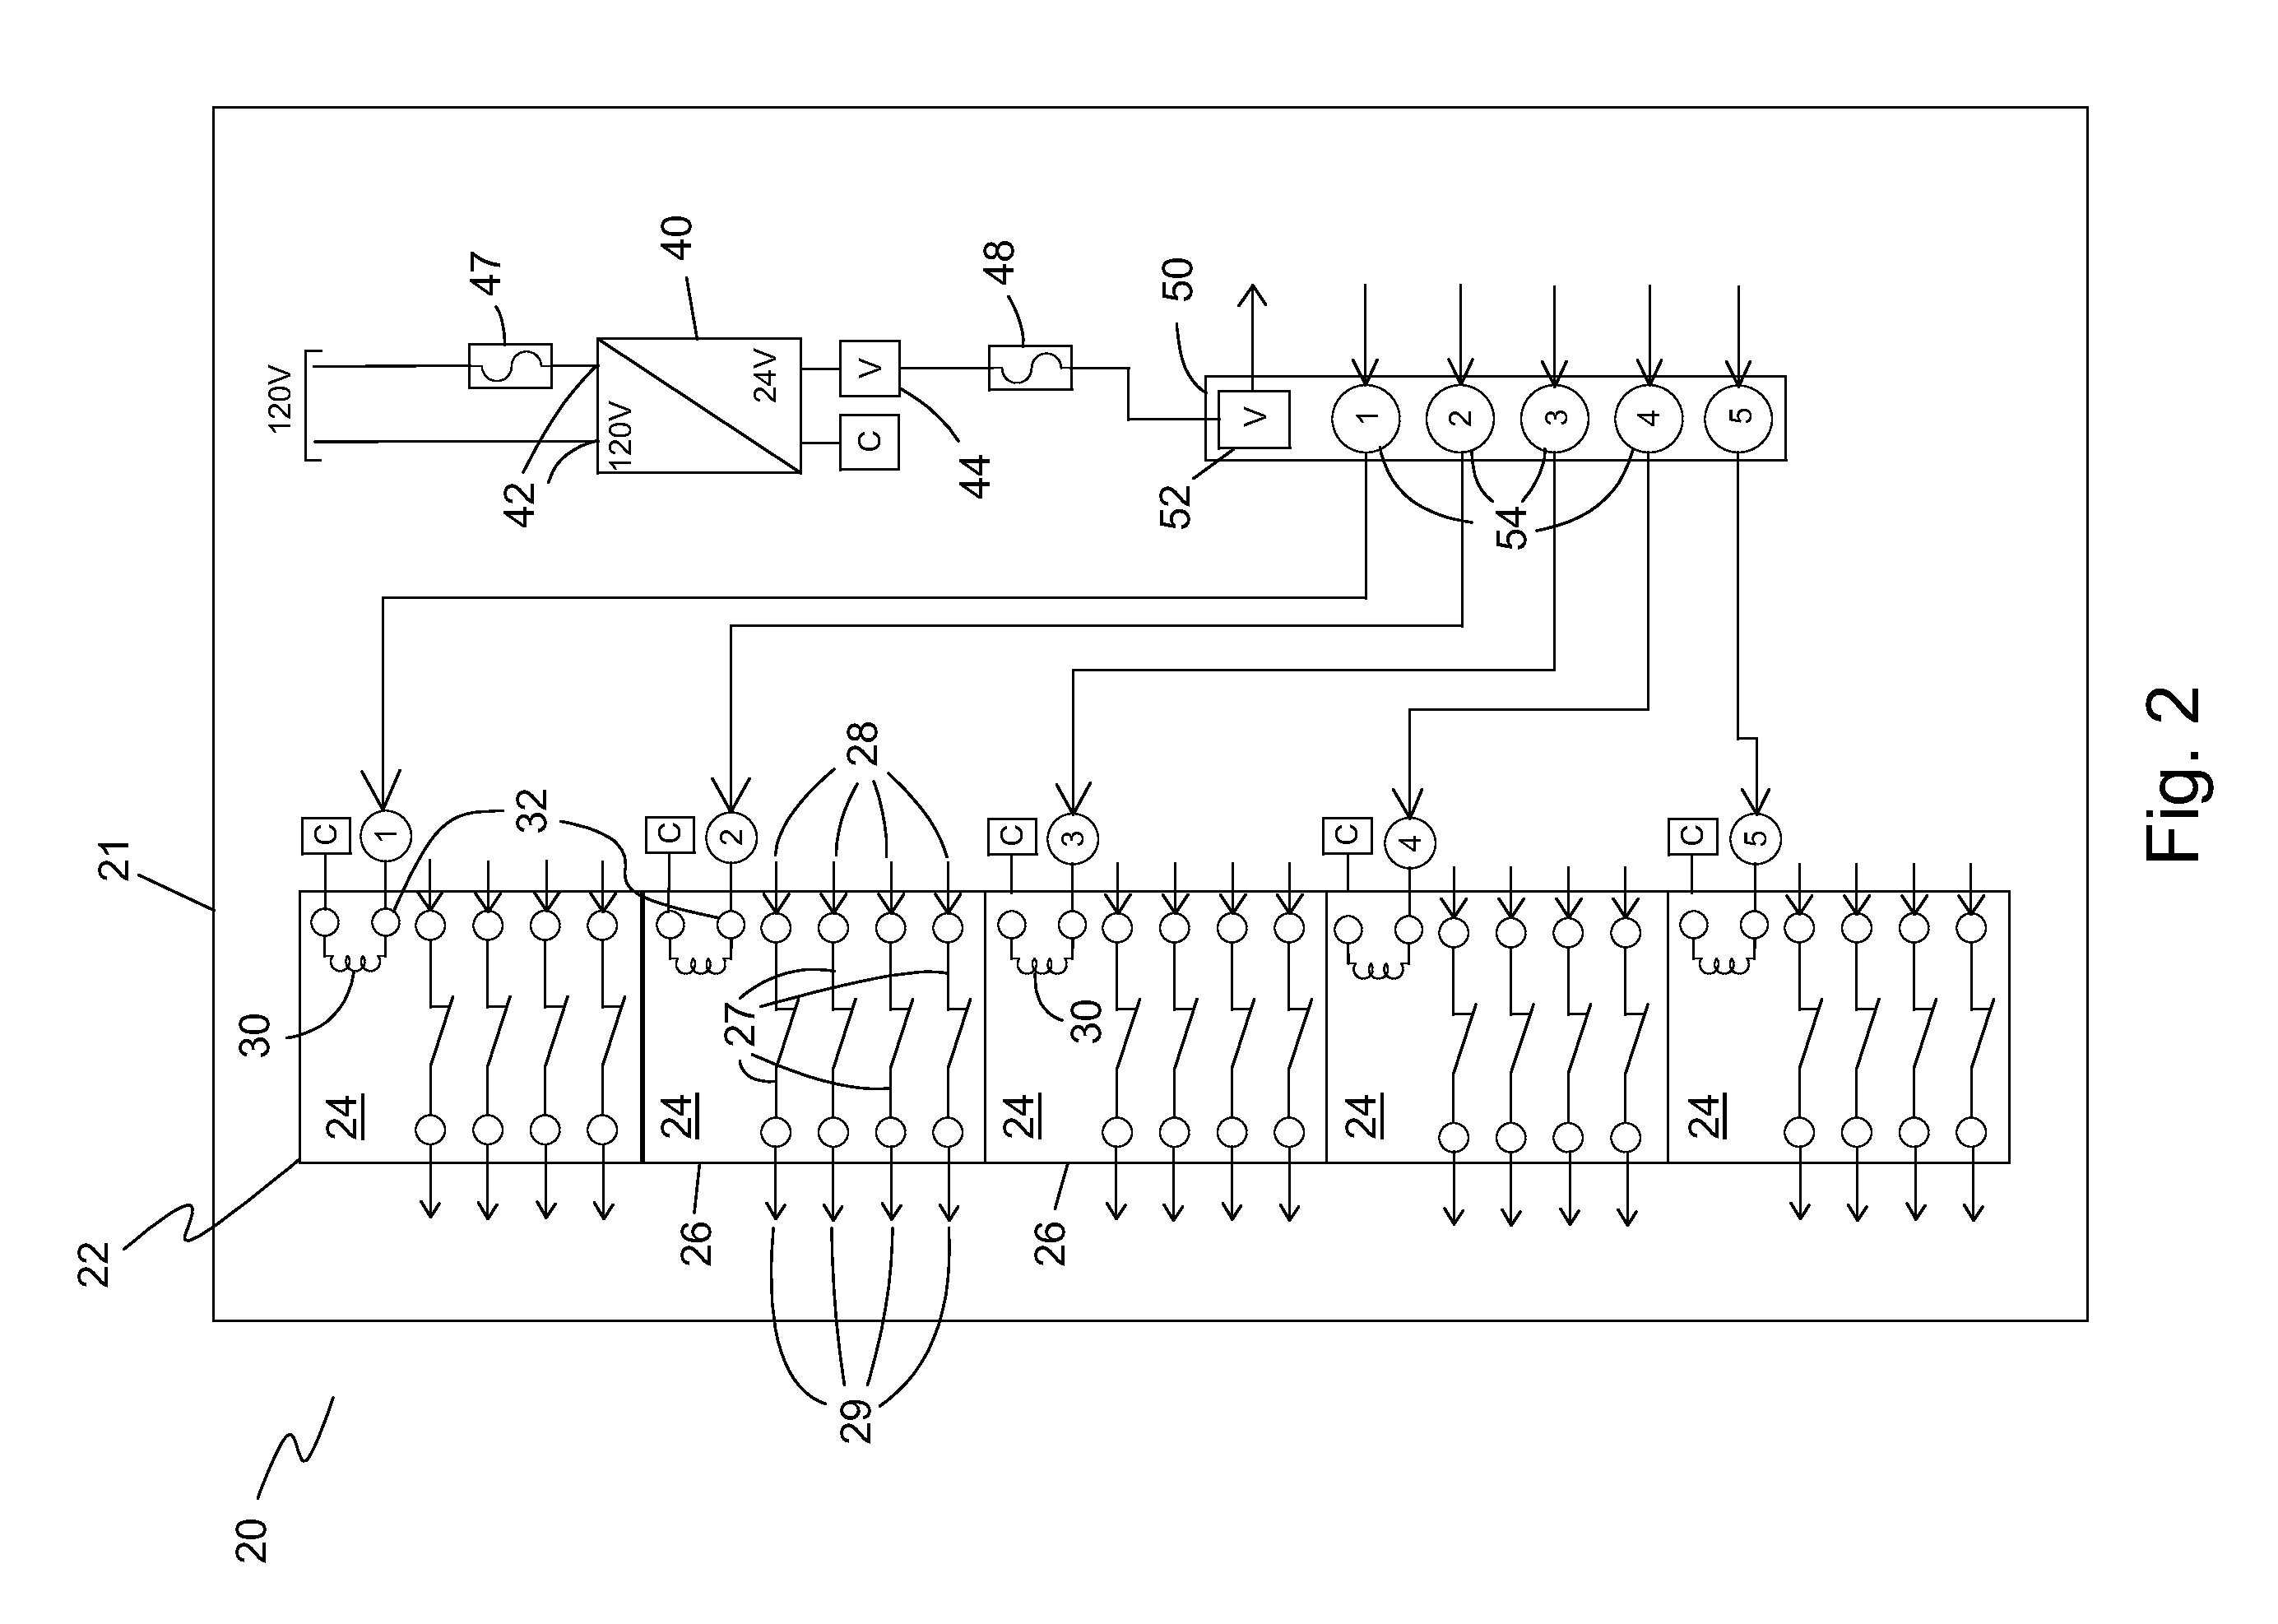 Power control panel, system and method